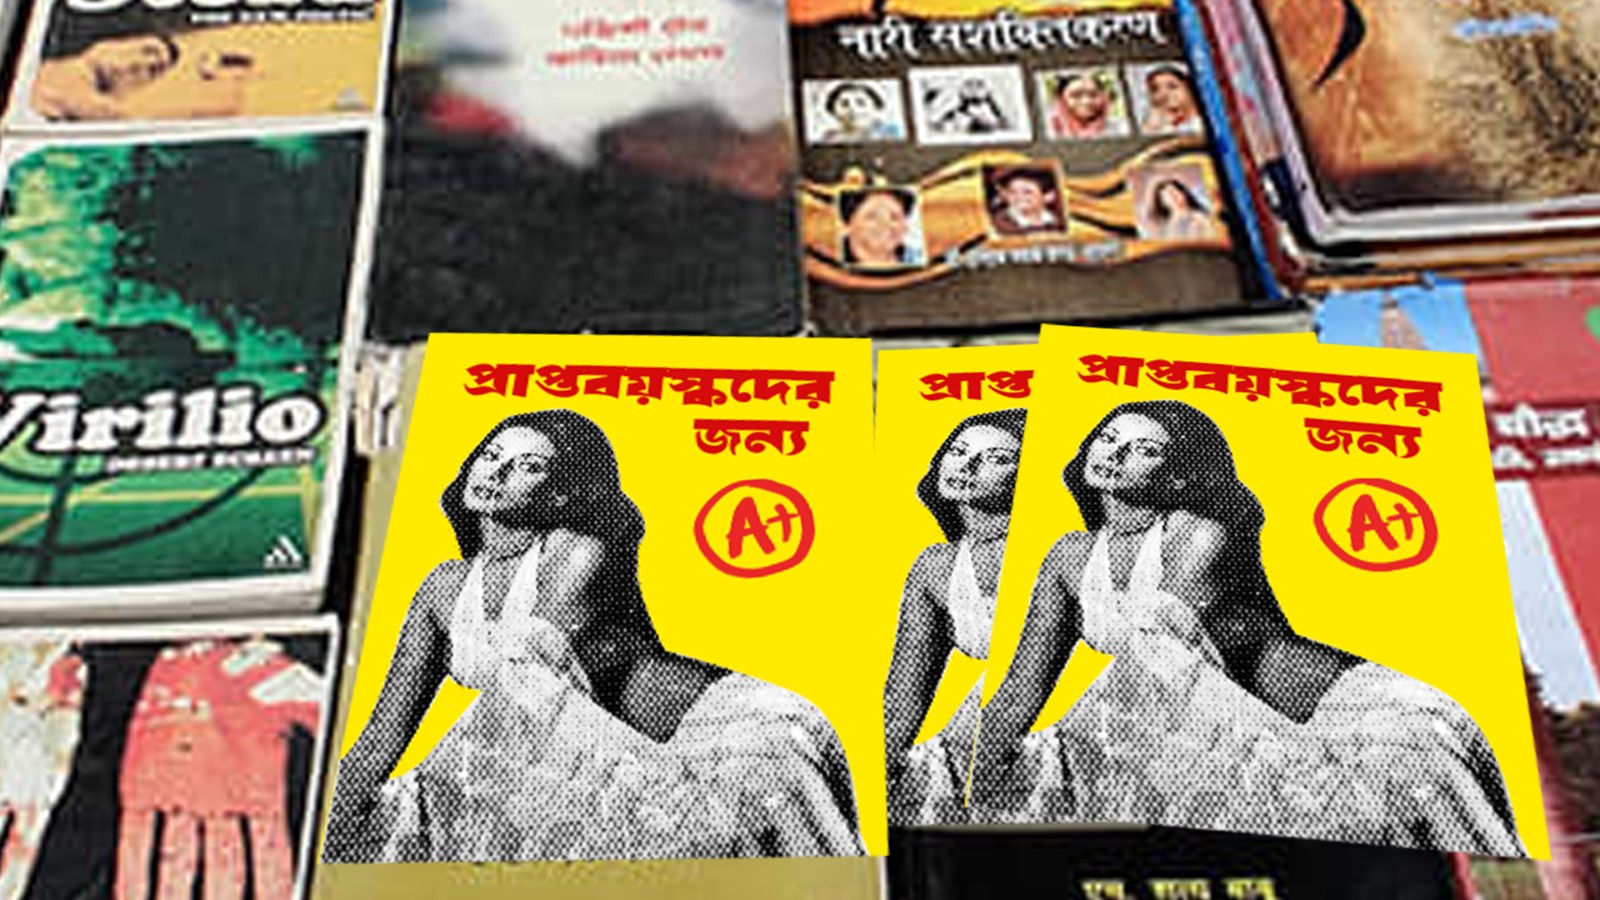 know more about 'Holud boi', the erotica books introduced in Bengal